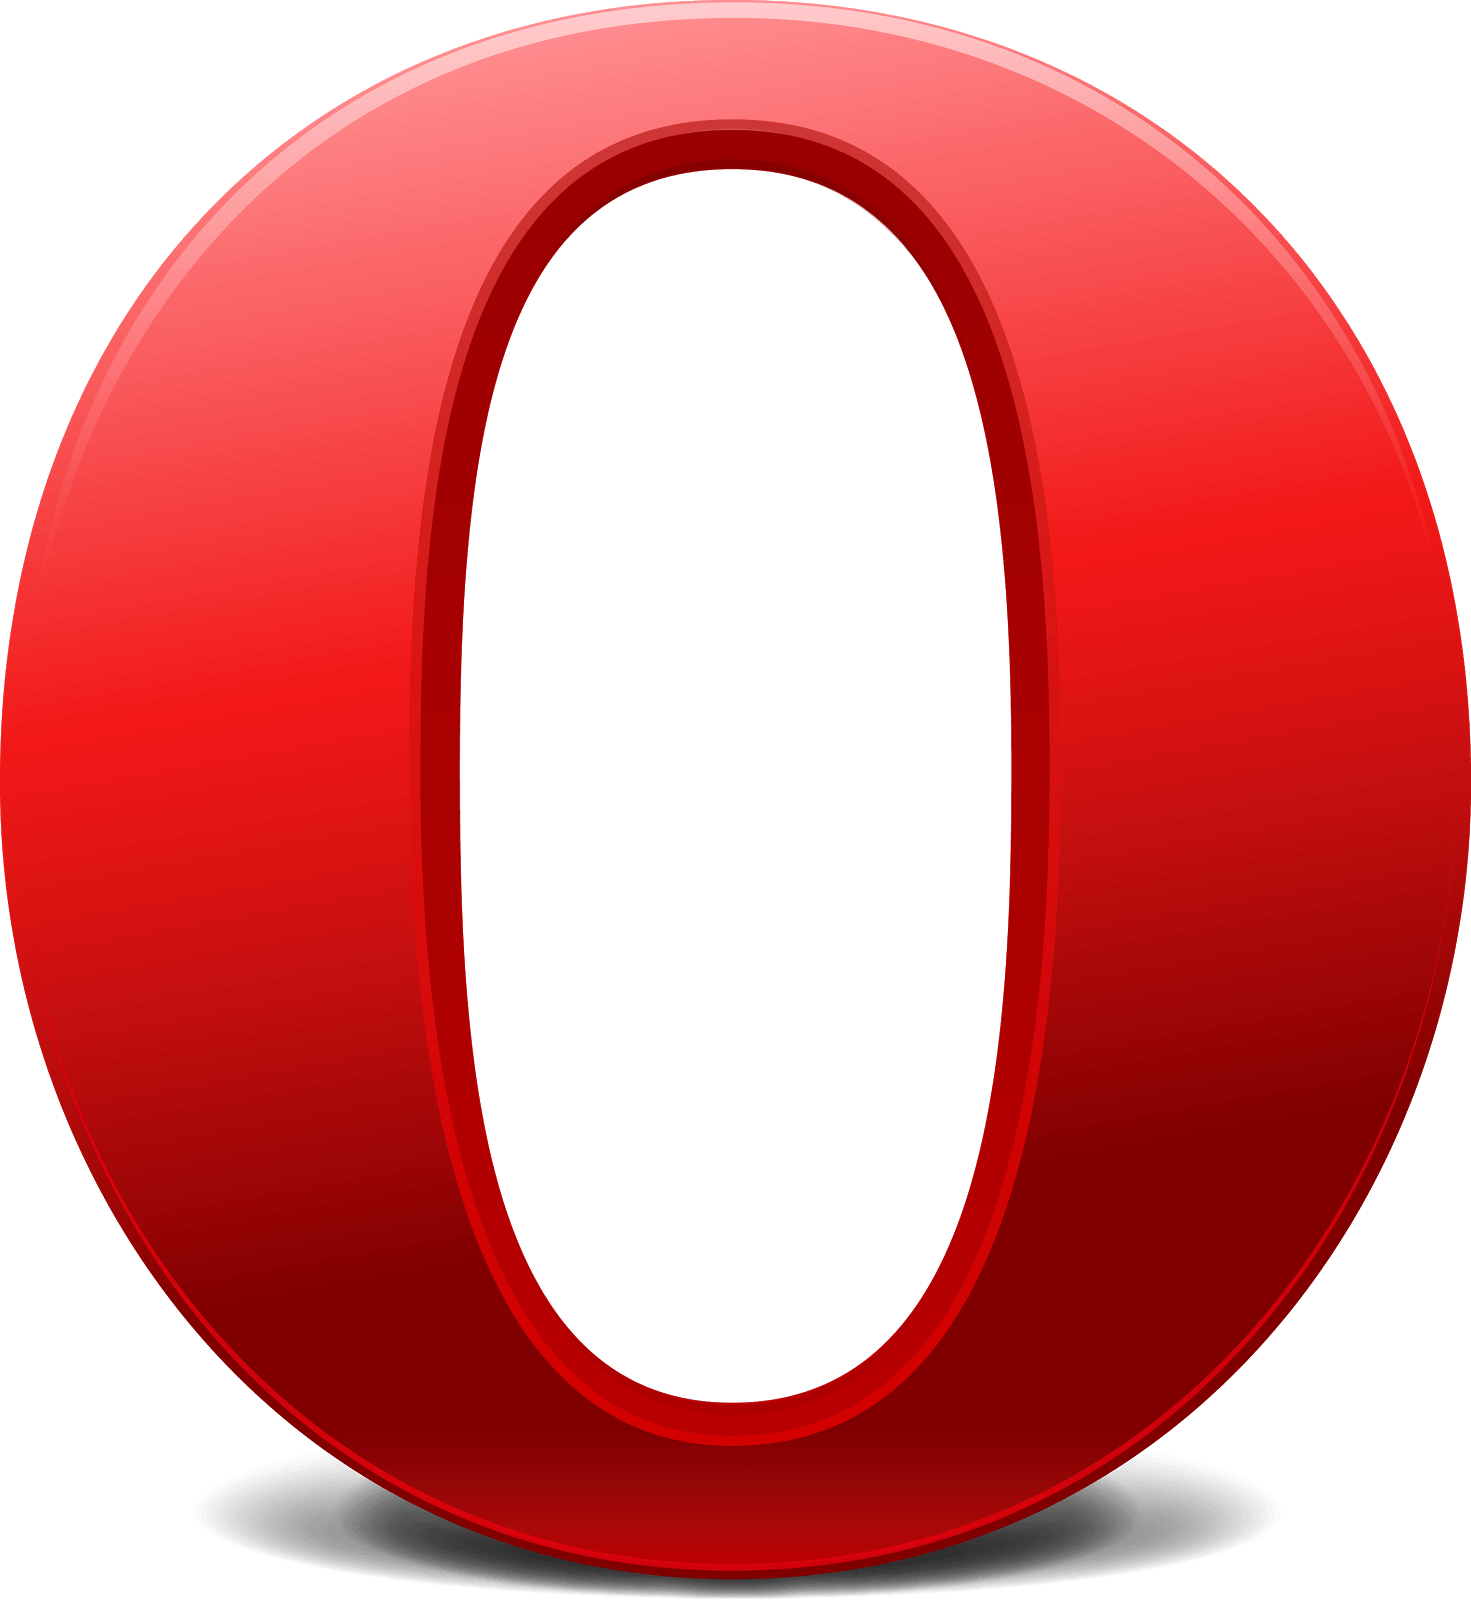 Old Opera Logo - Opera 12 updated! Now supports elliptic ciphers